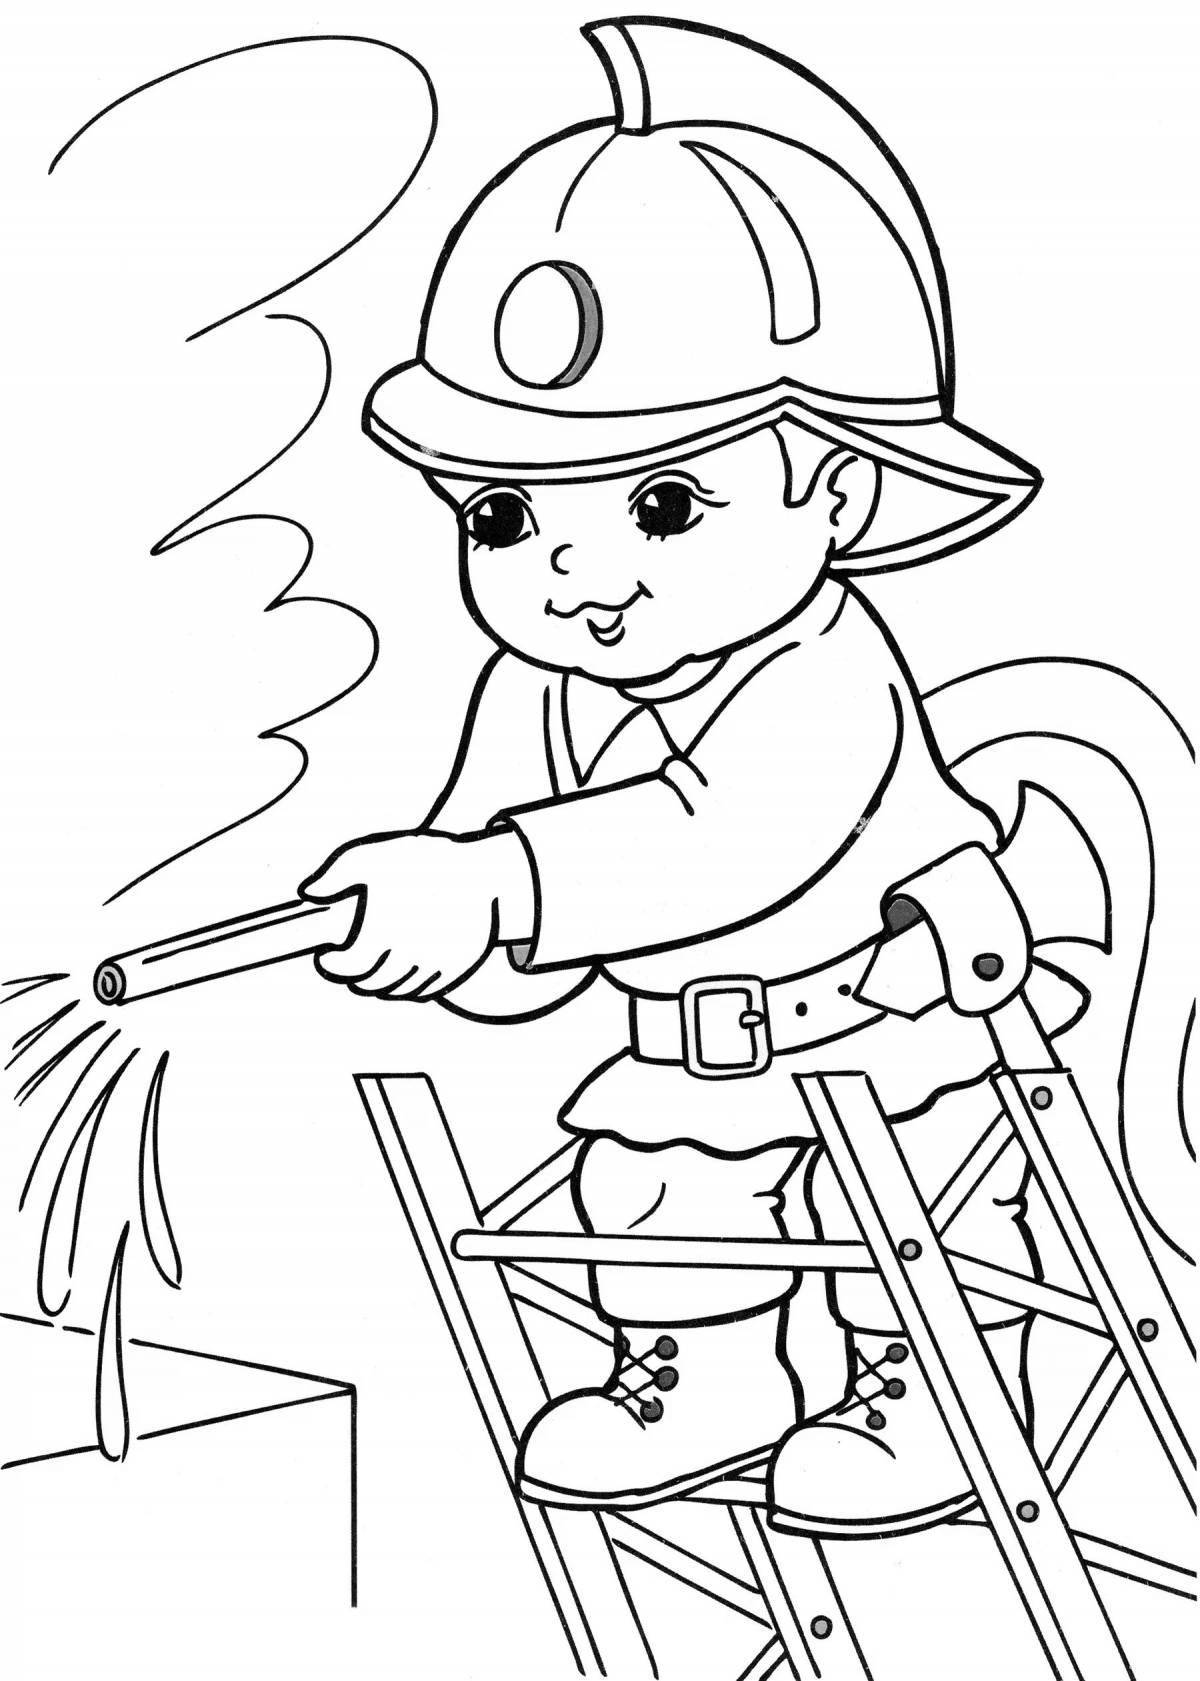 Firefighter profession #9